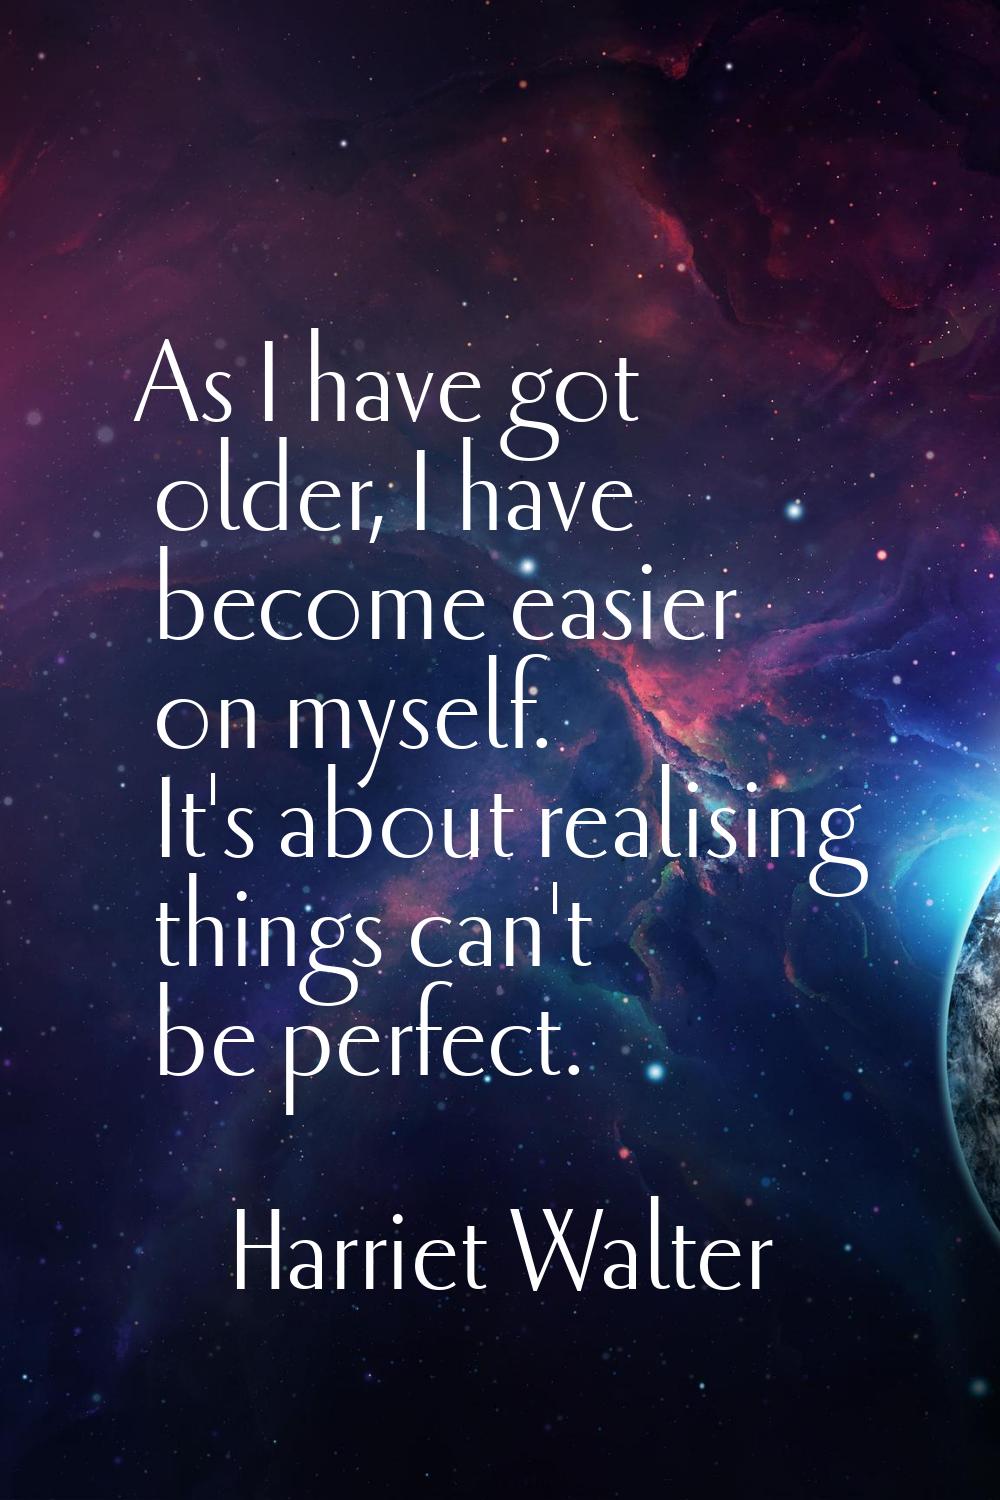 As I have got older, I have become easier on myself. It's about realising things can't be perfect.